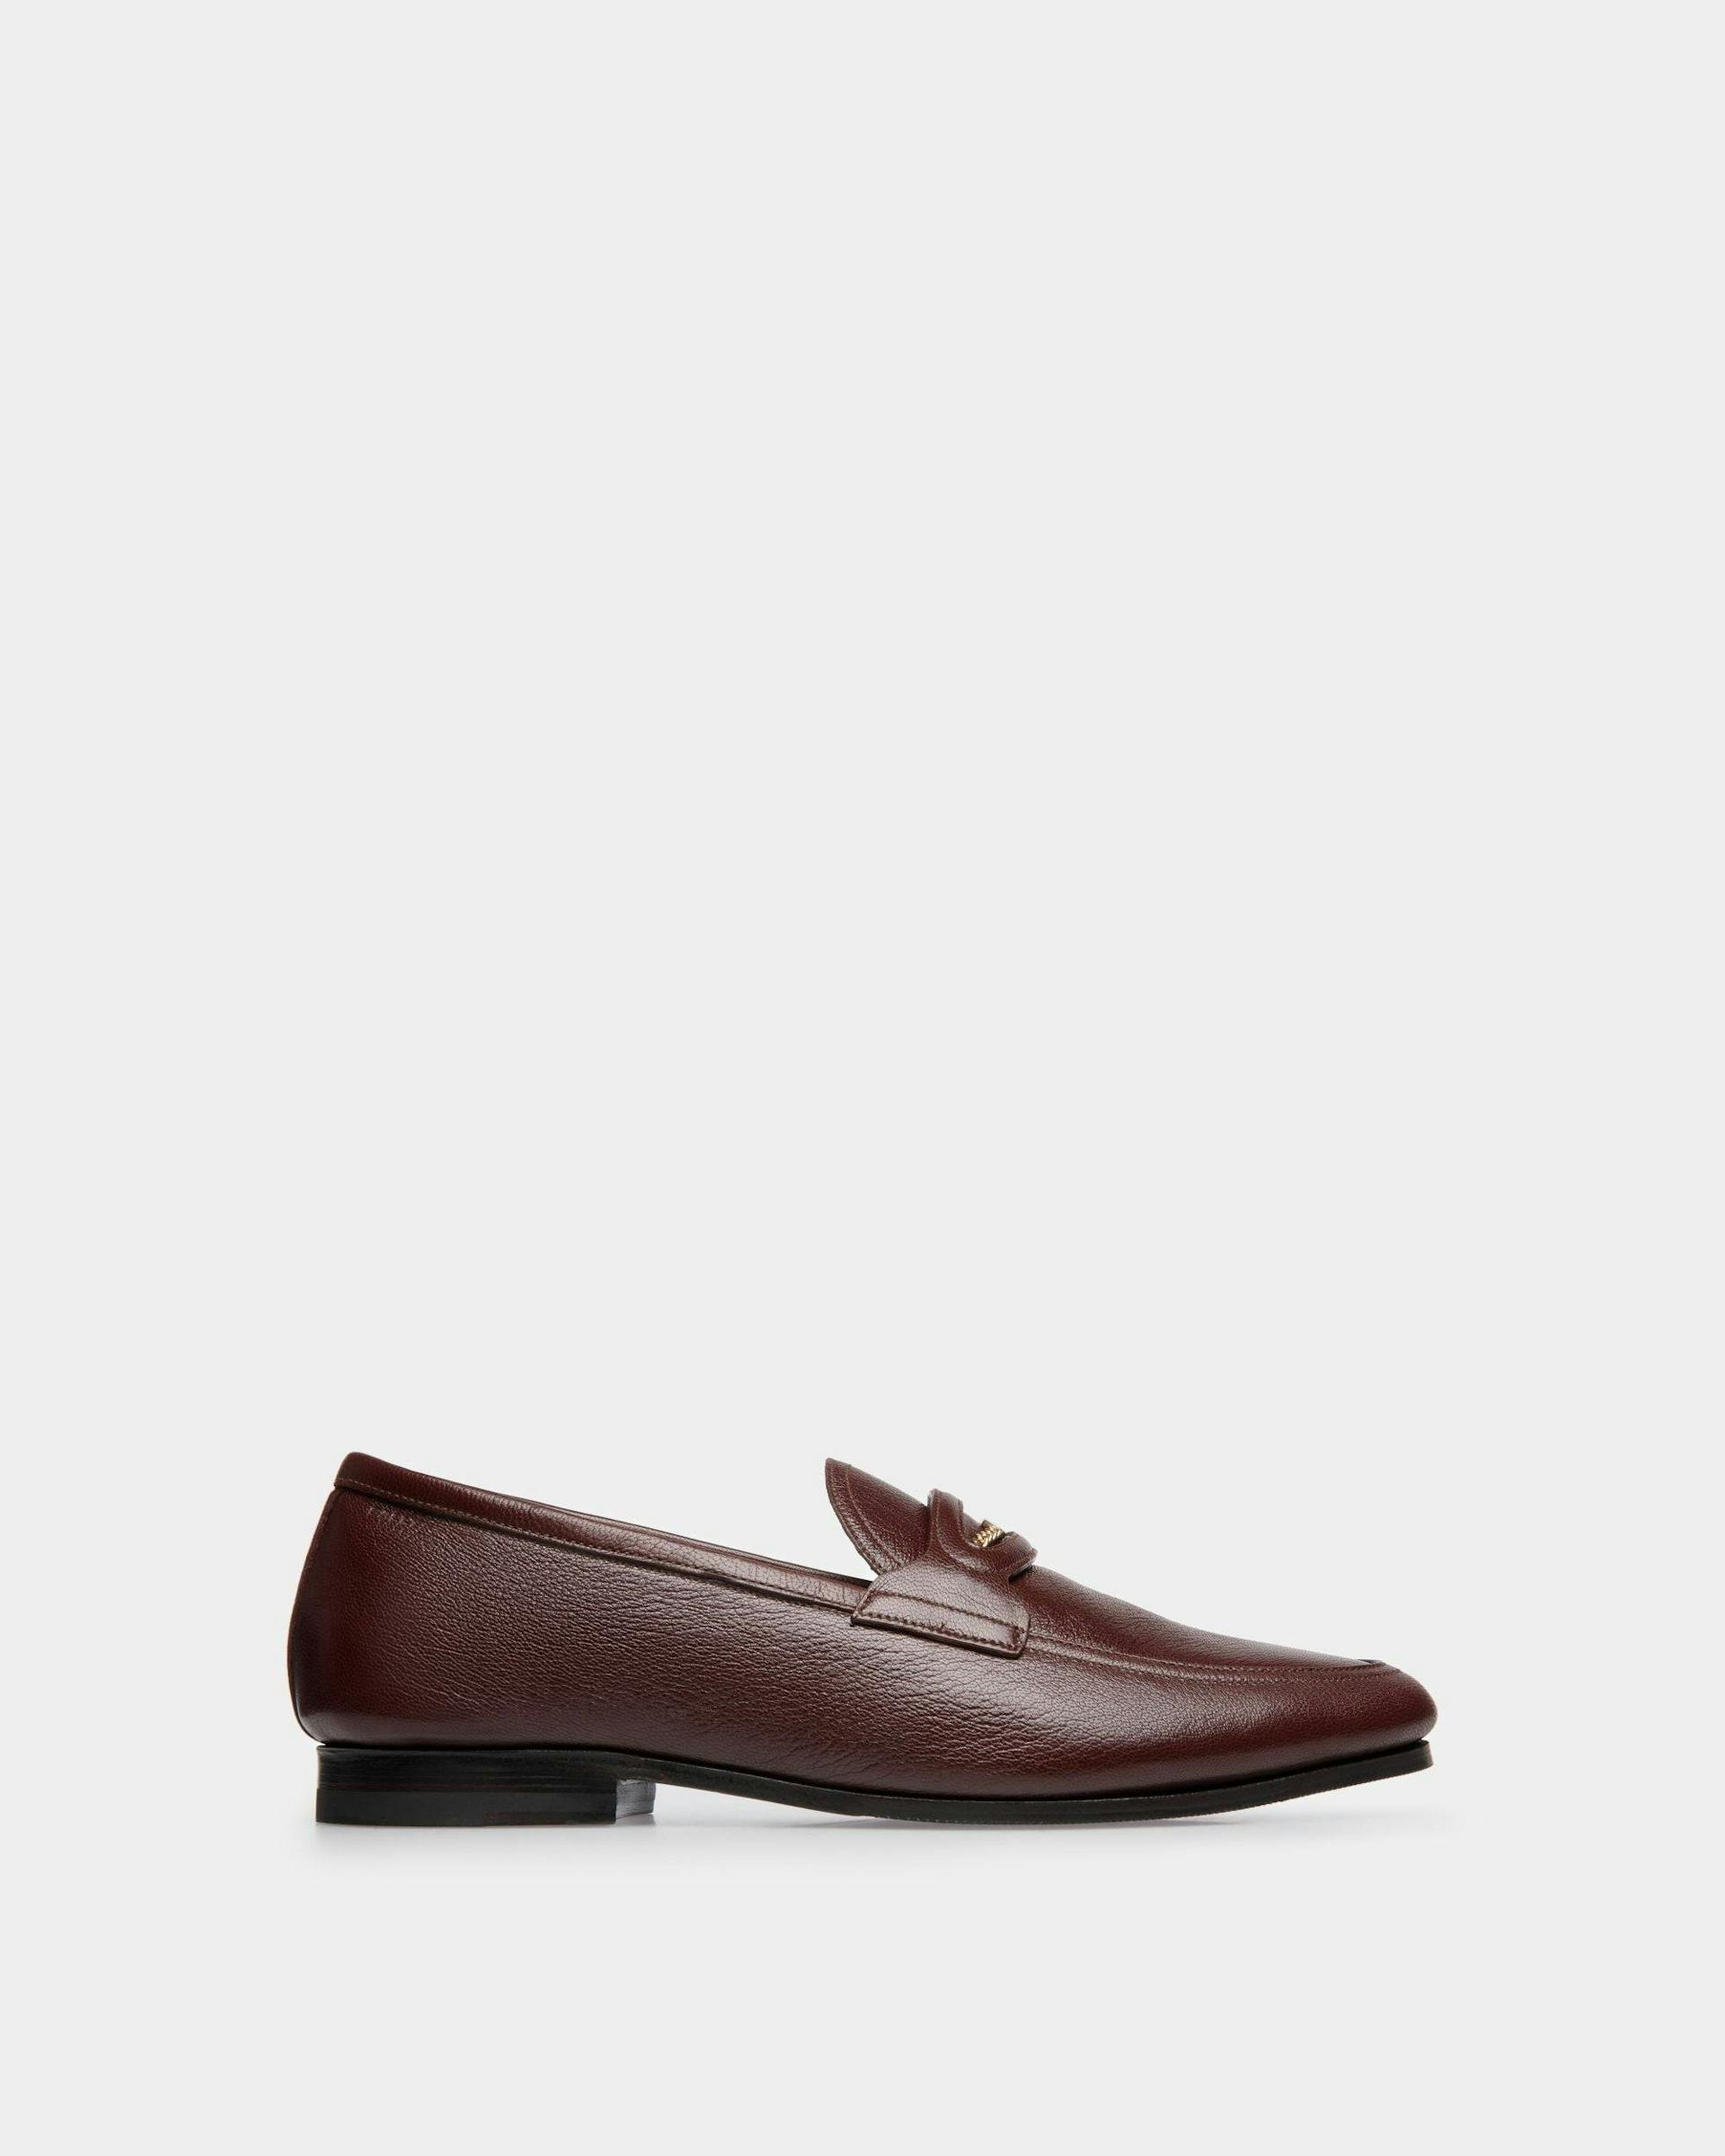 Men's Plume Loafer in Chestnut Brown Grained Leather | Bally | Still Life Side